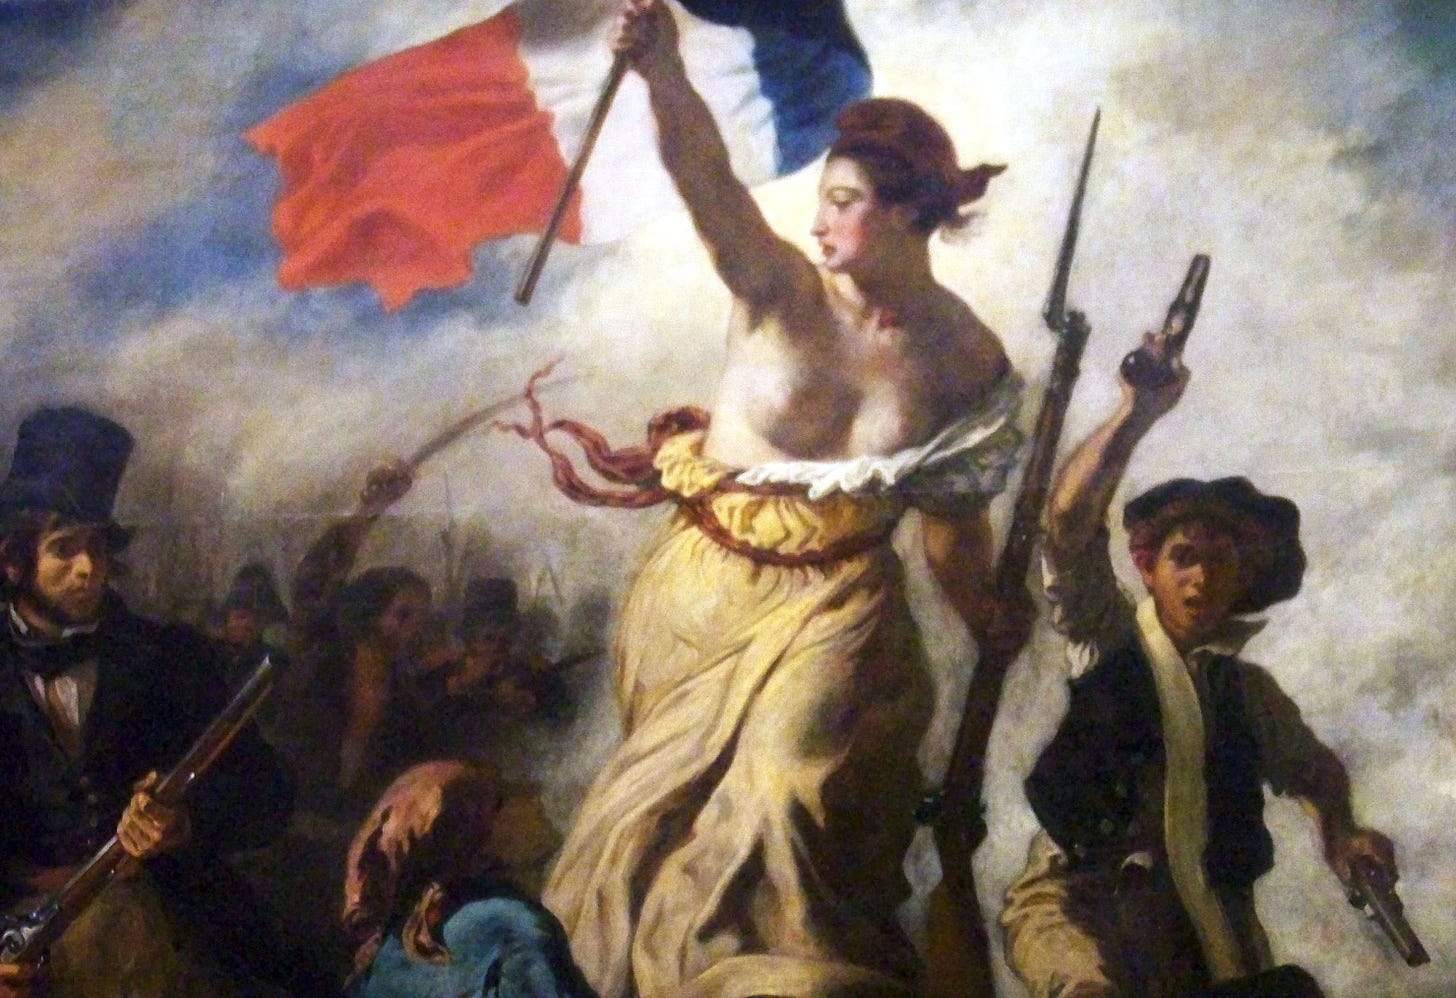 File:Detail from "Liberty Leading the People" at the Louvre (cropped).jpg -  Wikimedia Commons